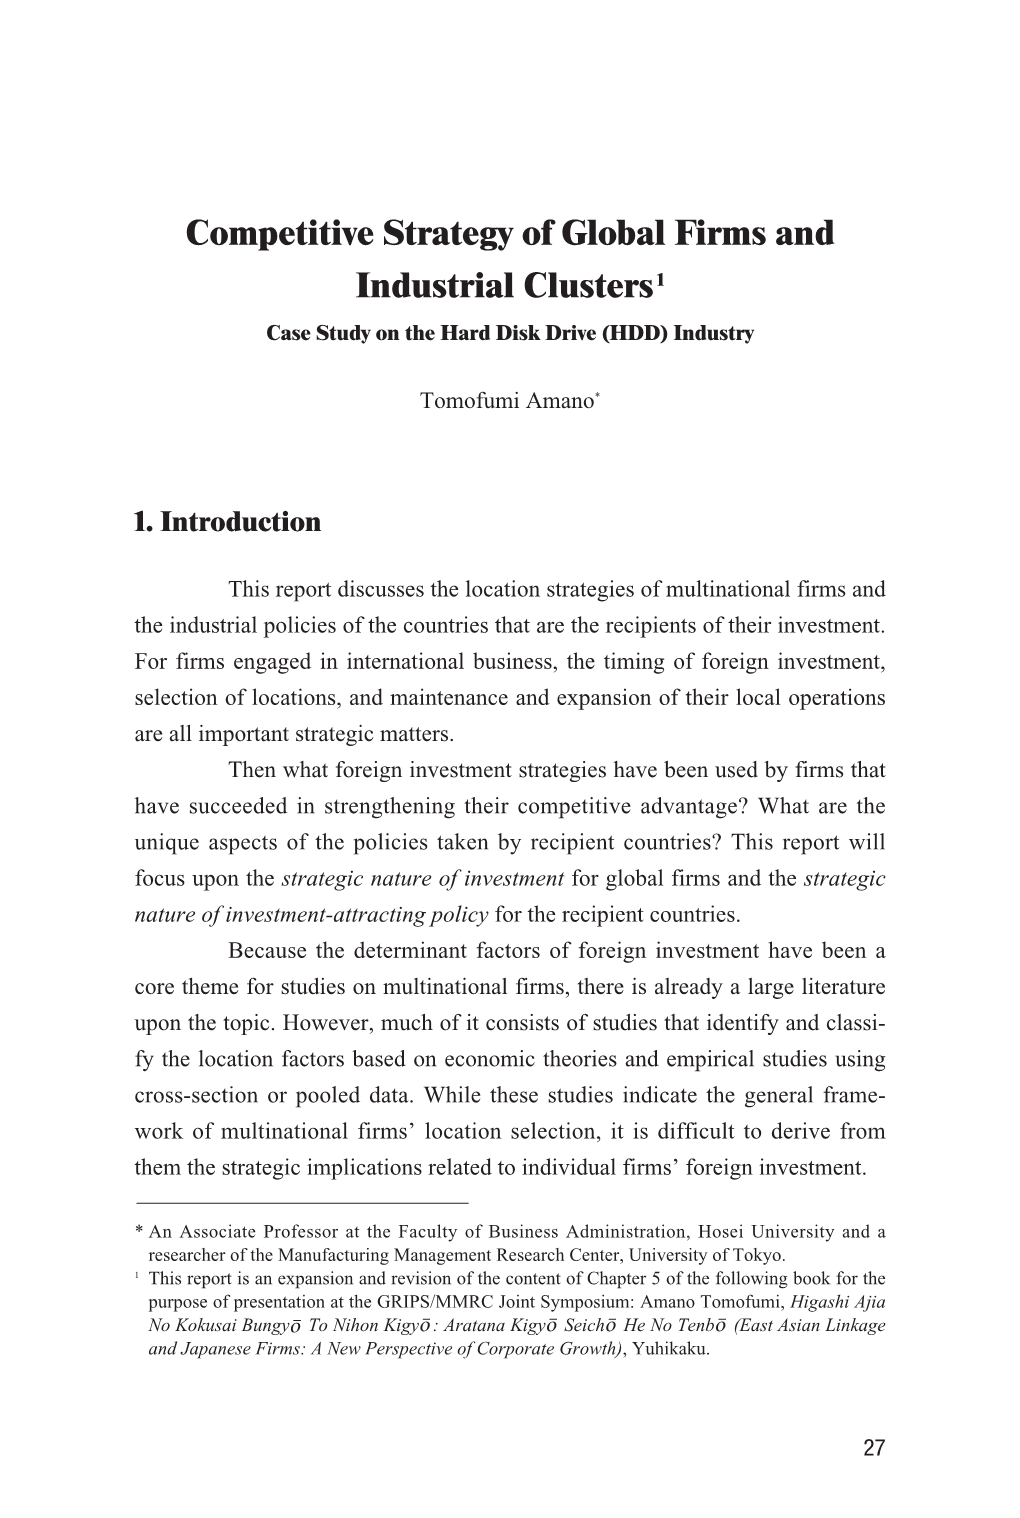 Competitive Strategy of Global Firms and Industrial Clusters1